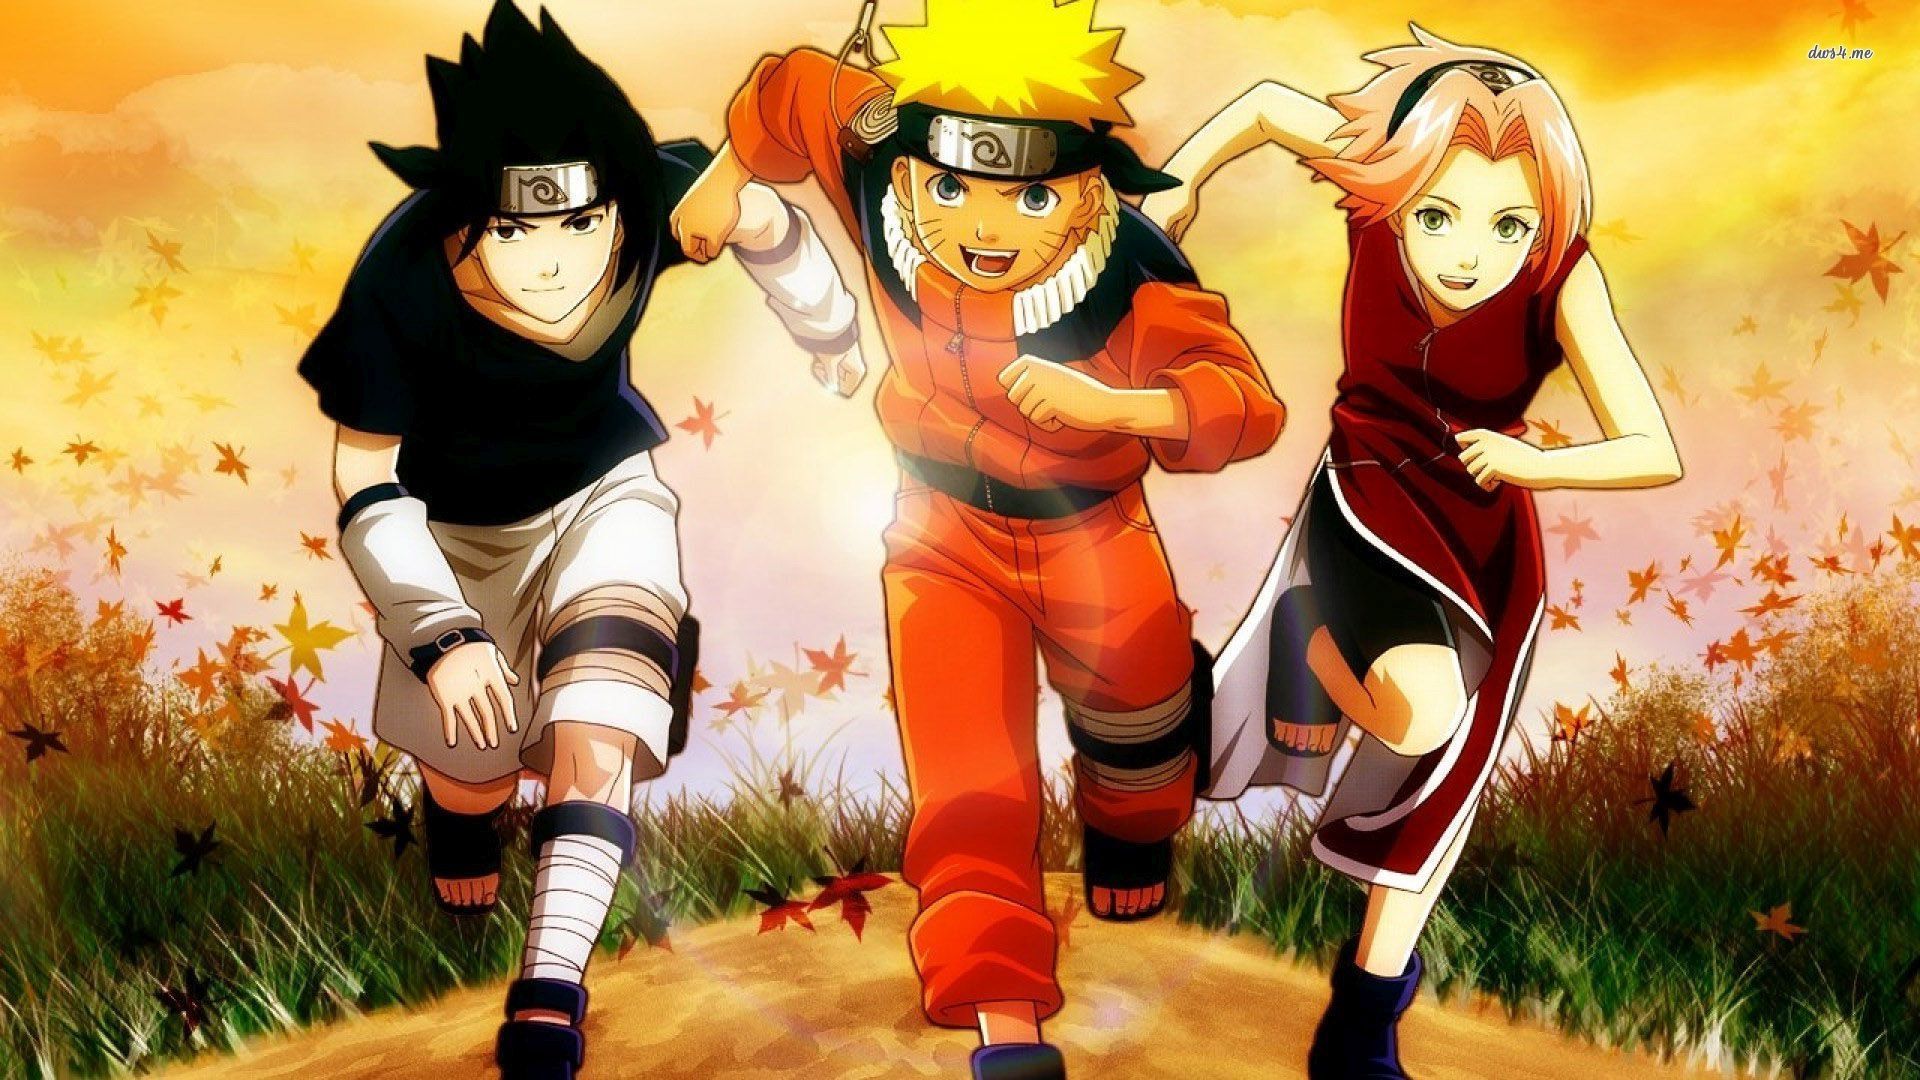 Free download Naruto Wallpaper Picture Image [1920x1080]